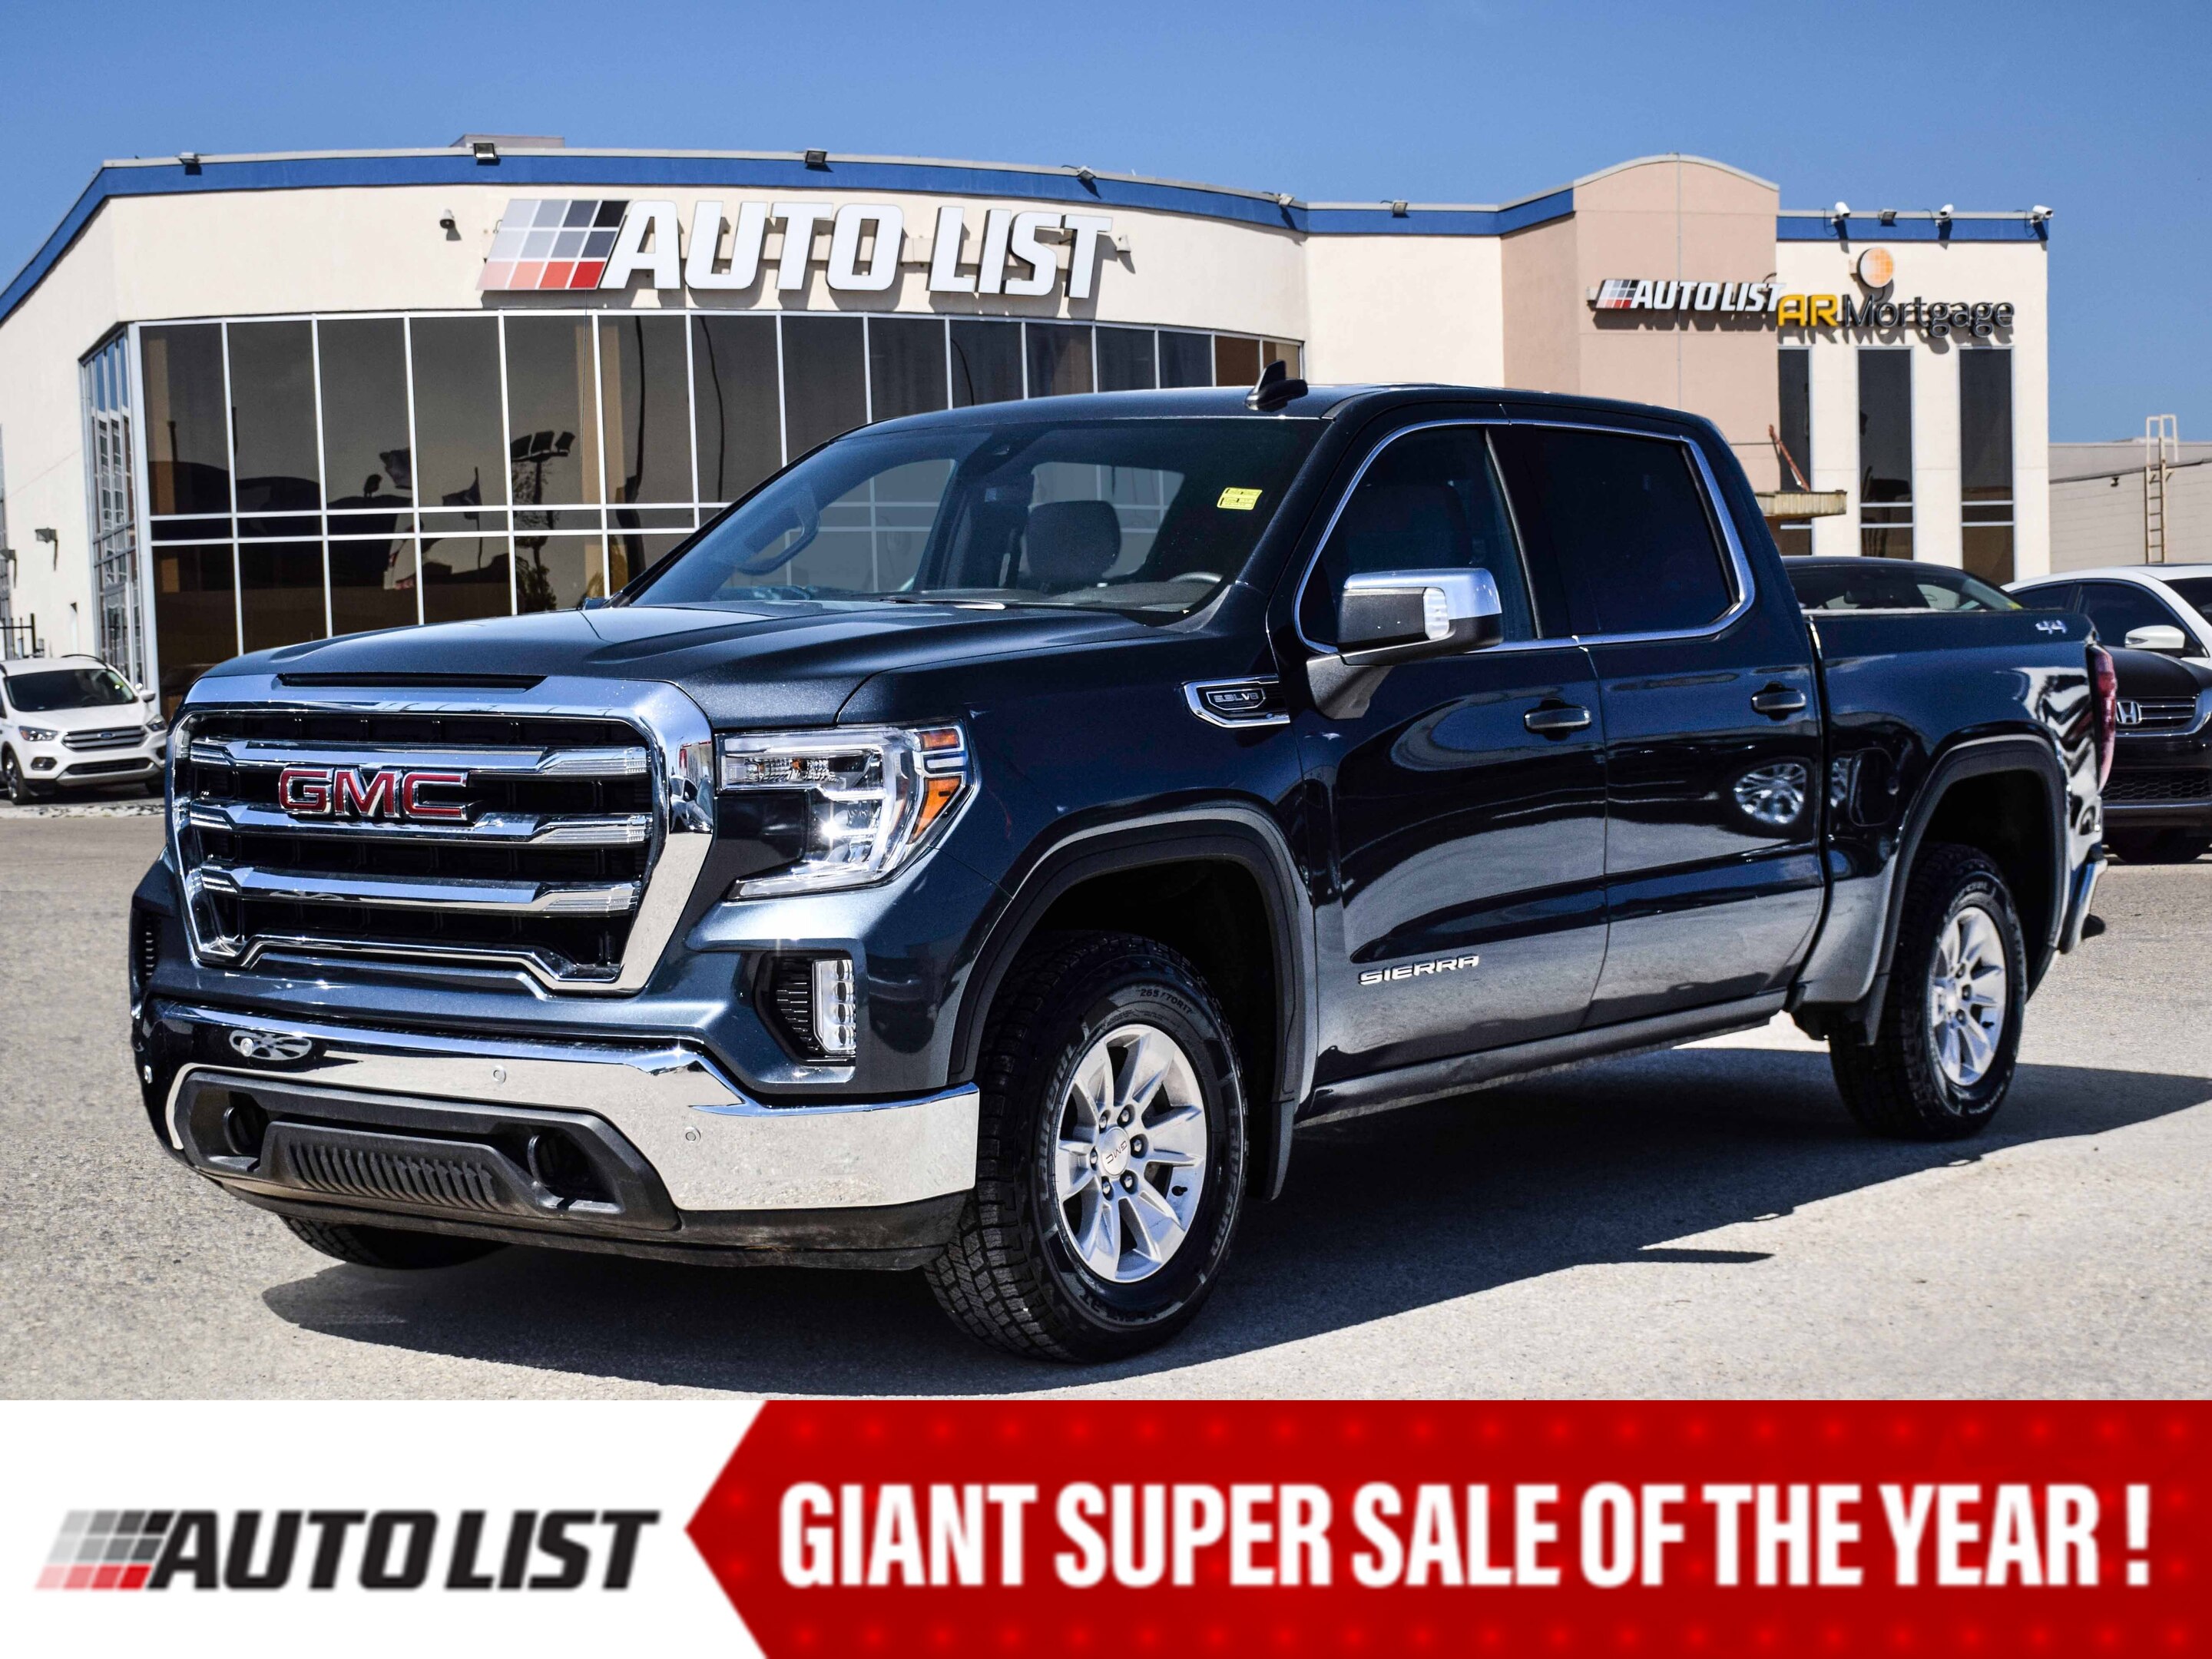 2022 GMC Sierra 1500 Limited SLE CREW CAB*4X4*5.3L*MULTIPRO TAILGATE*HTD SEAT*